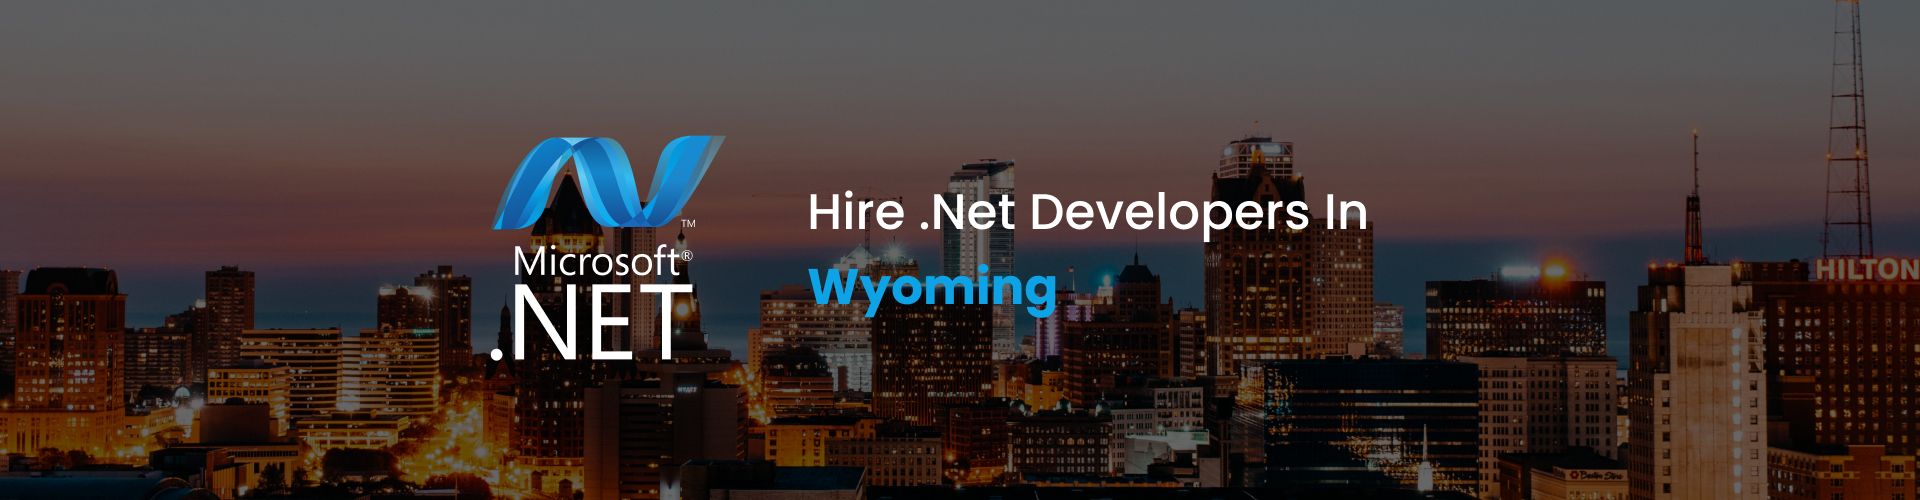 hire dot net developers in wyoming